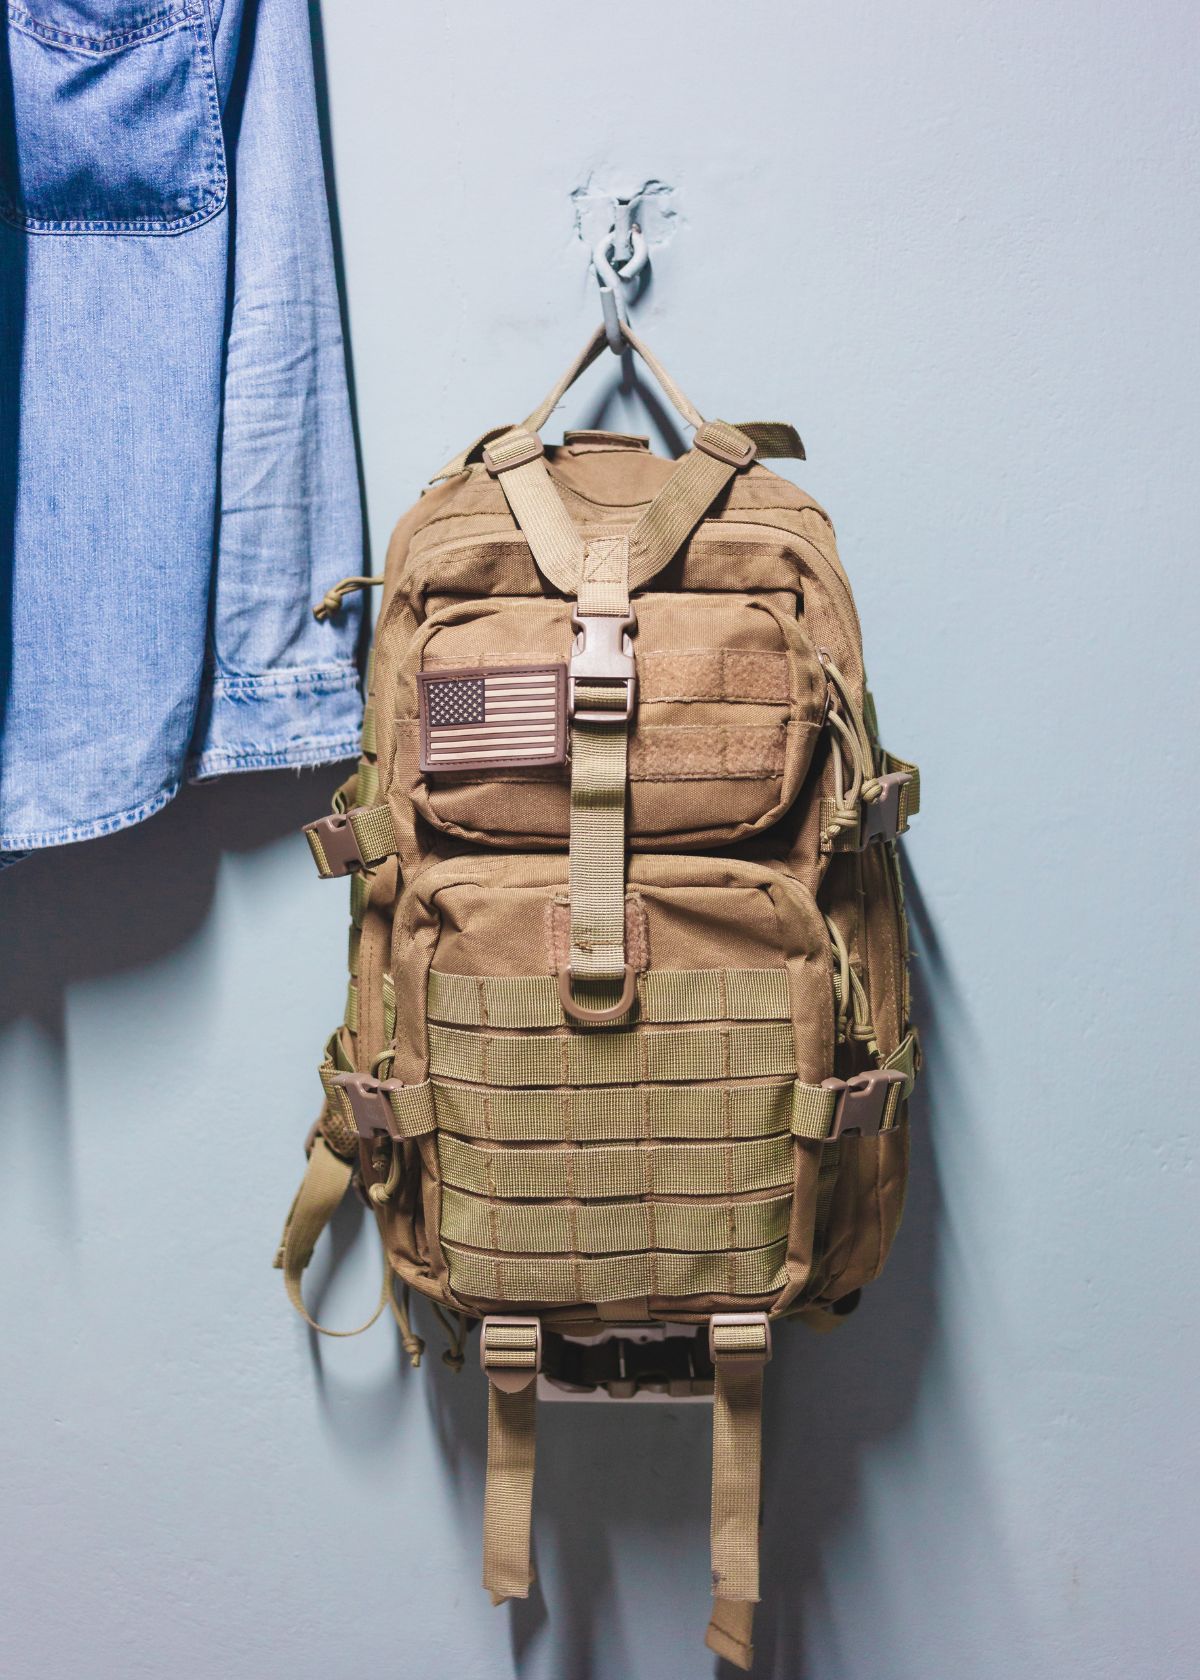 Best tactical backpack